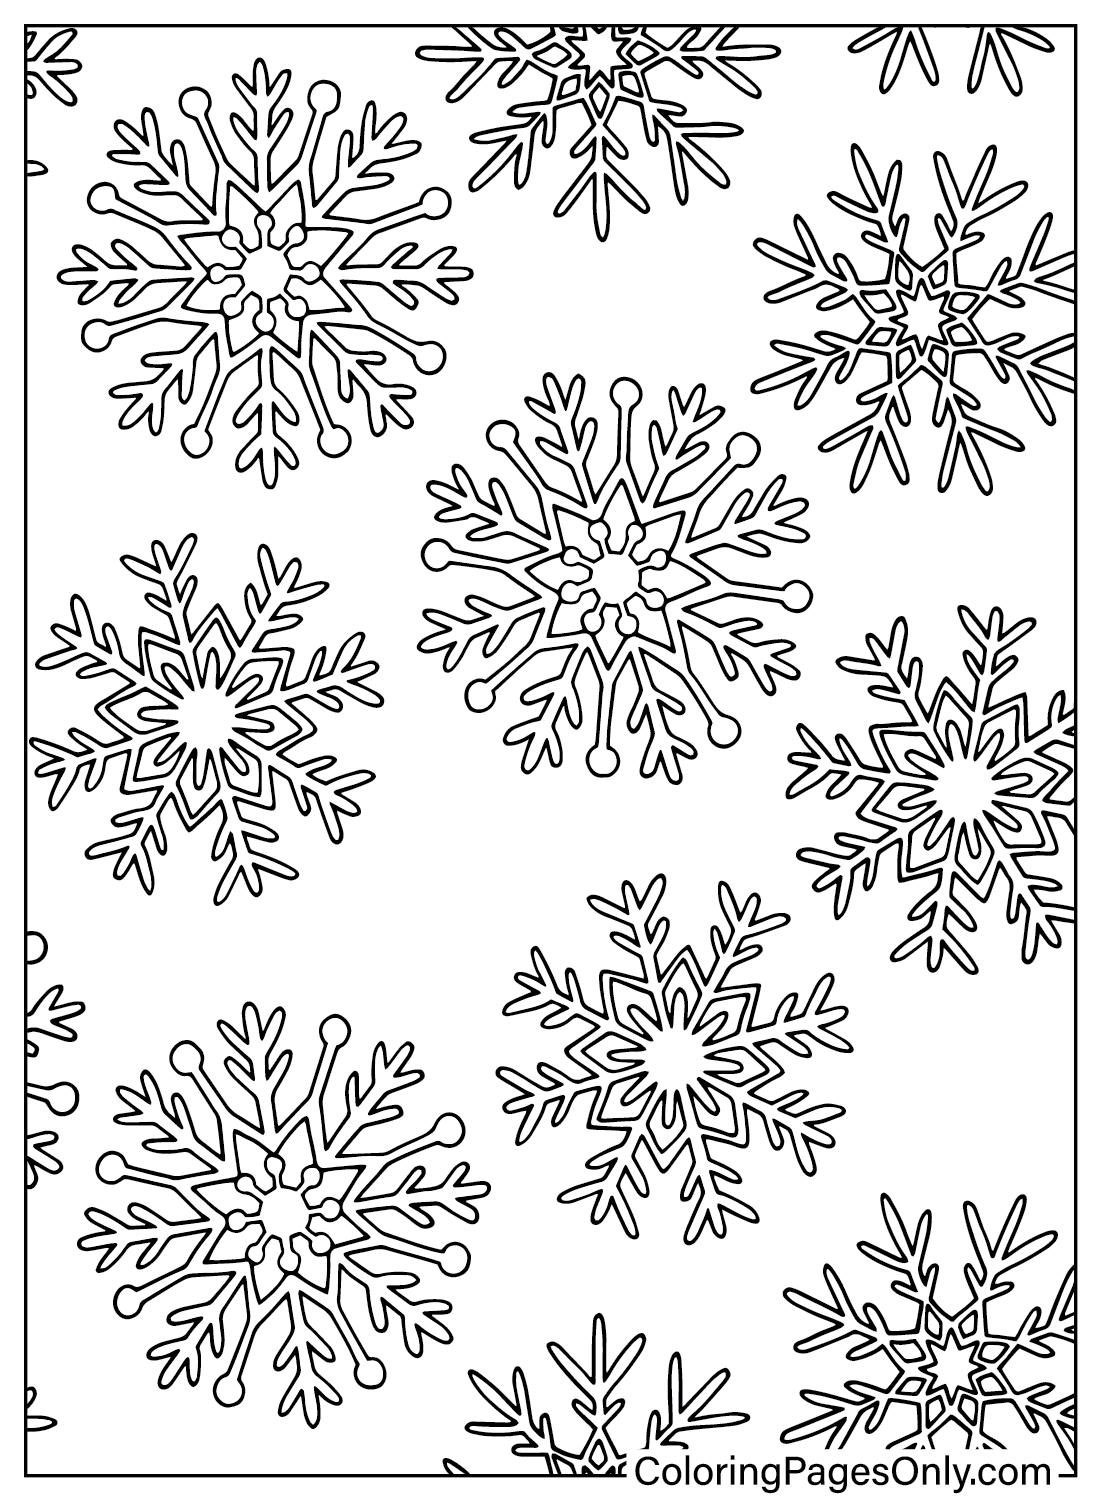 Preschool Snowflake Coloring Page from Nature & Seasons